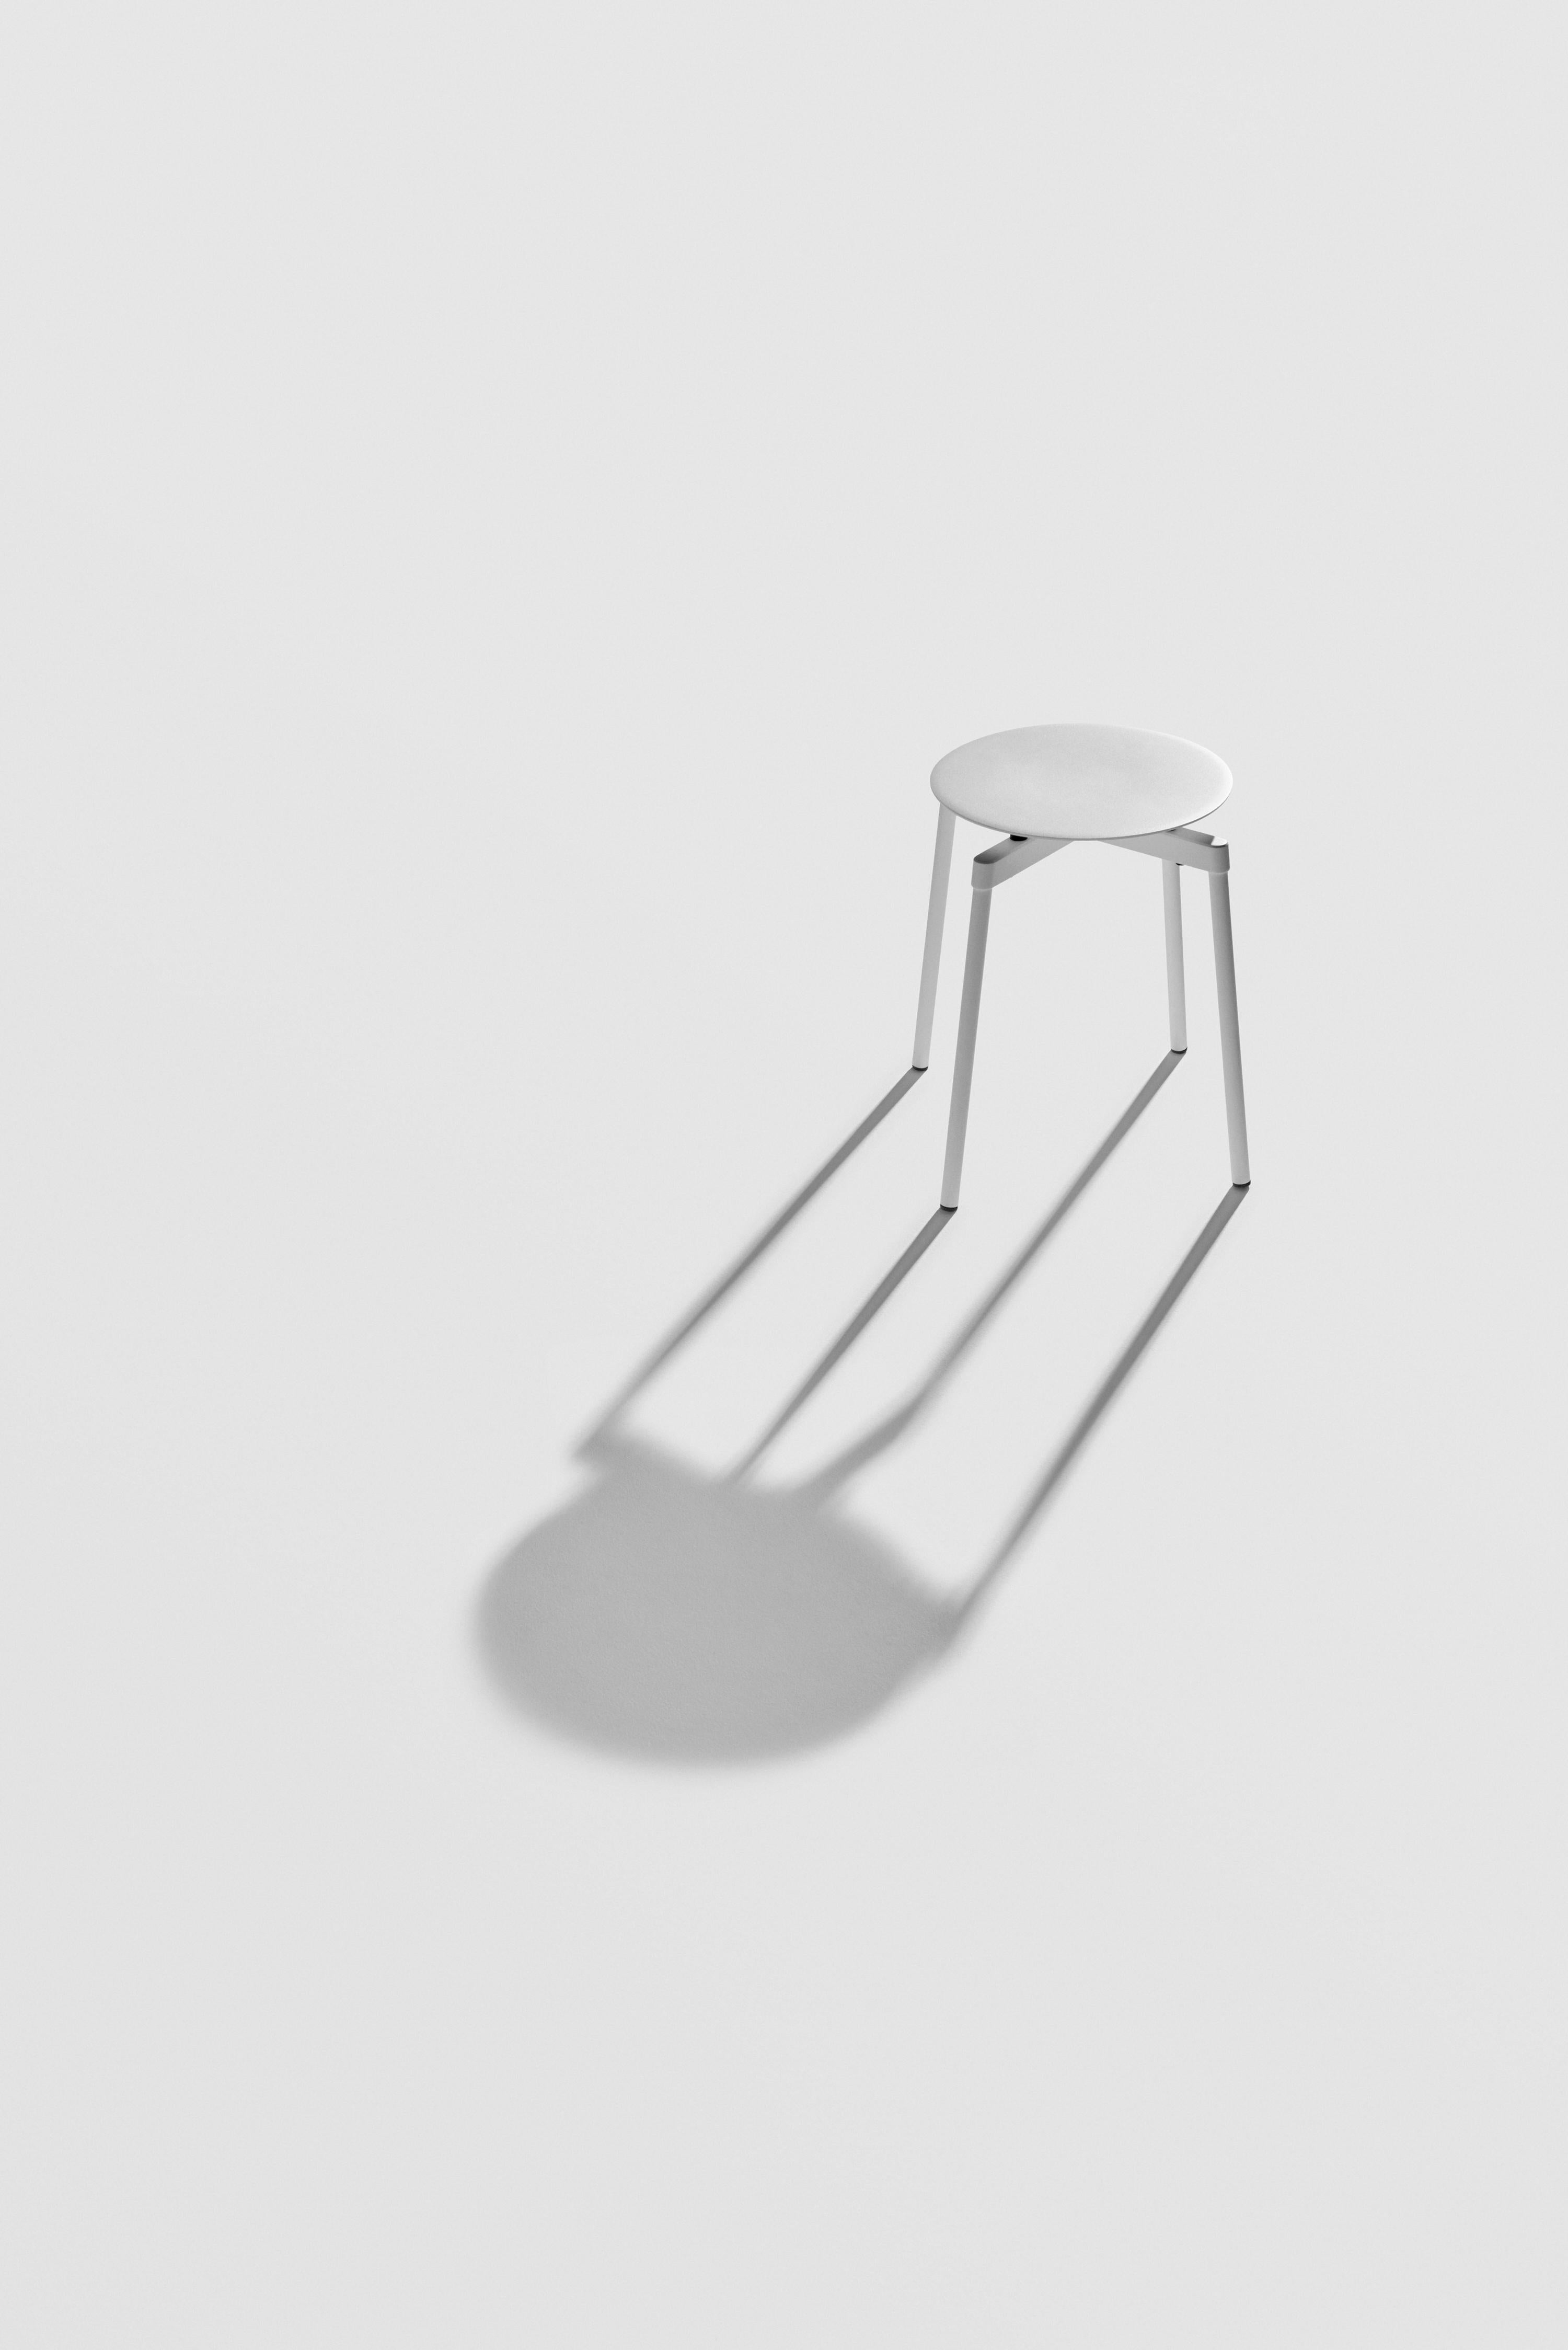 Petite Friture Fromme Stool in White Aluminium by Tom Chung, 2020

The Fromme collection stands out by its pure line and compact design. Absorbers placed under the seating gives a soft and very comfortable flexibility to seats. Made from